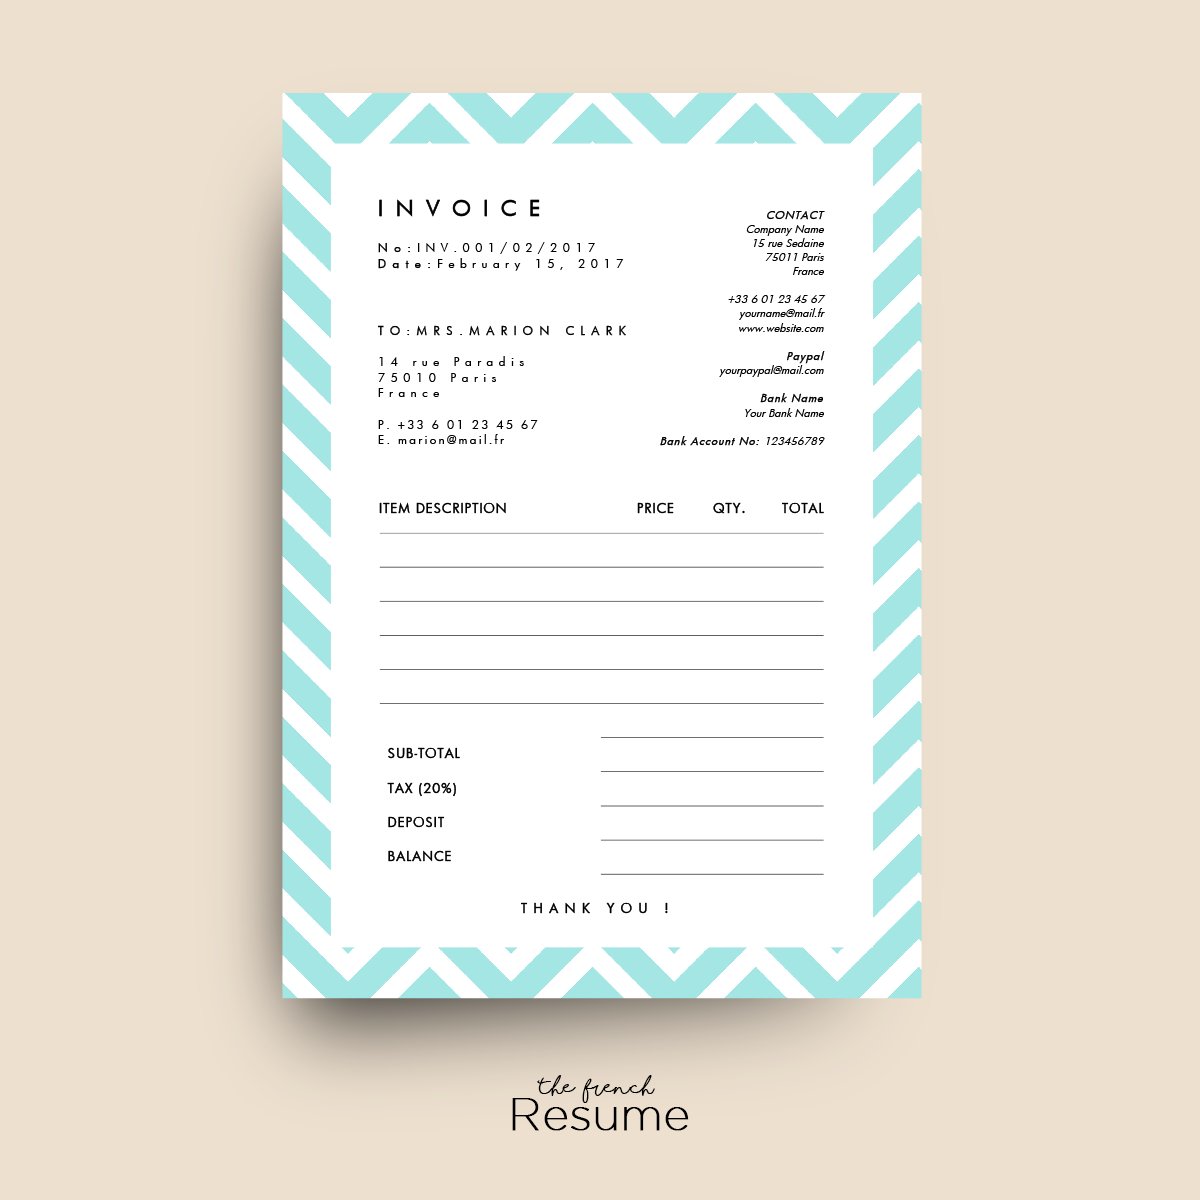 Invoice / Receipt Template for Word cover image.